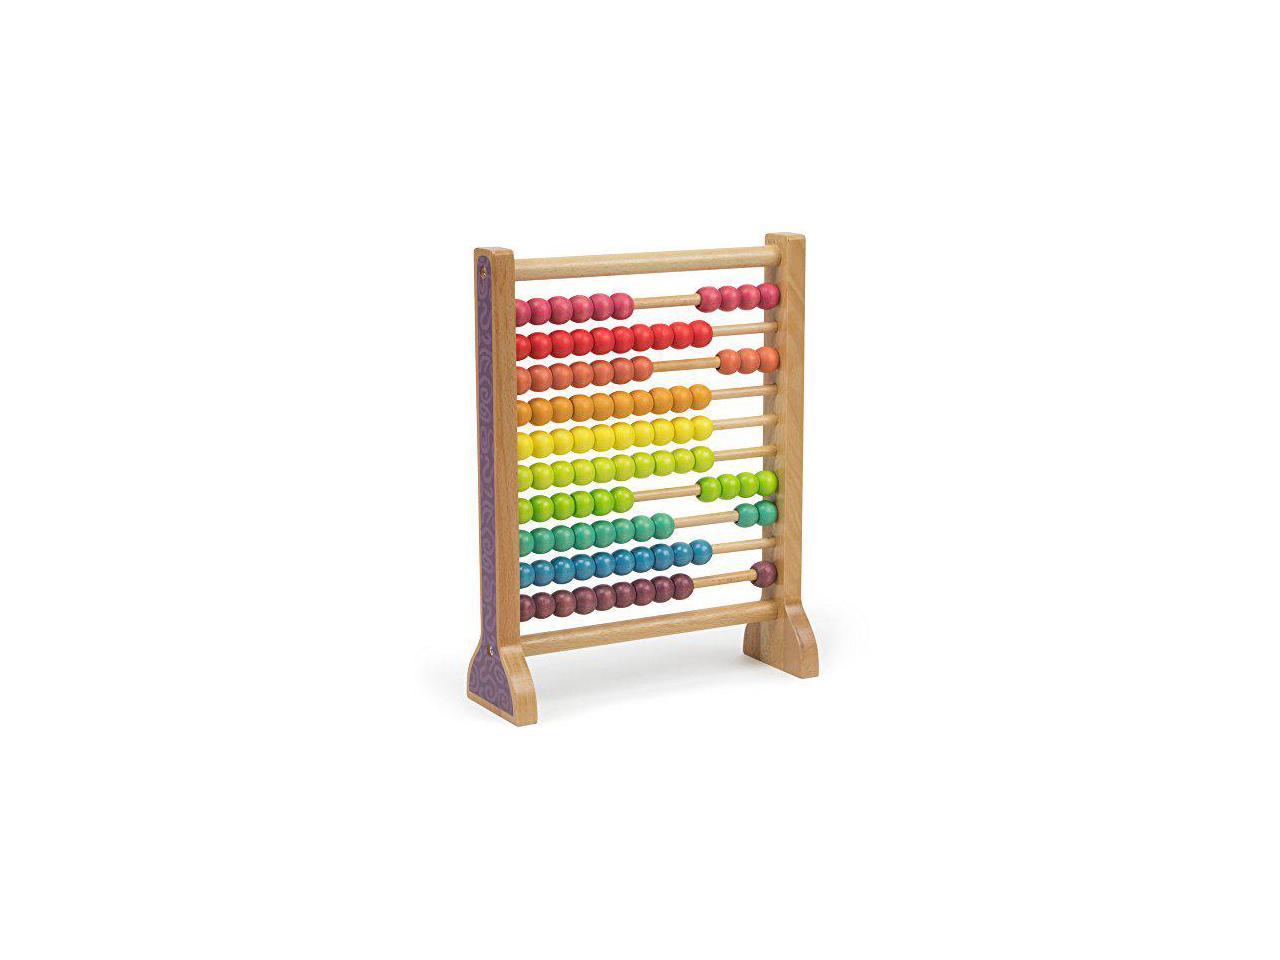 Imagination Generation Wooden Abacus Classic Counting Tool 100 Colorful Beads for sale online 